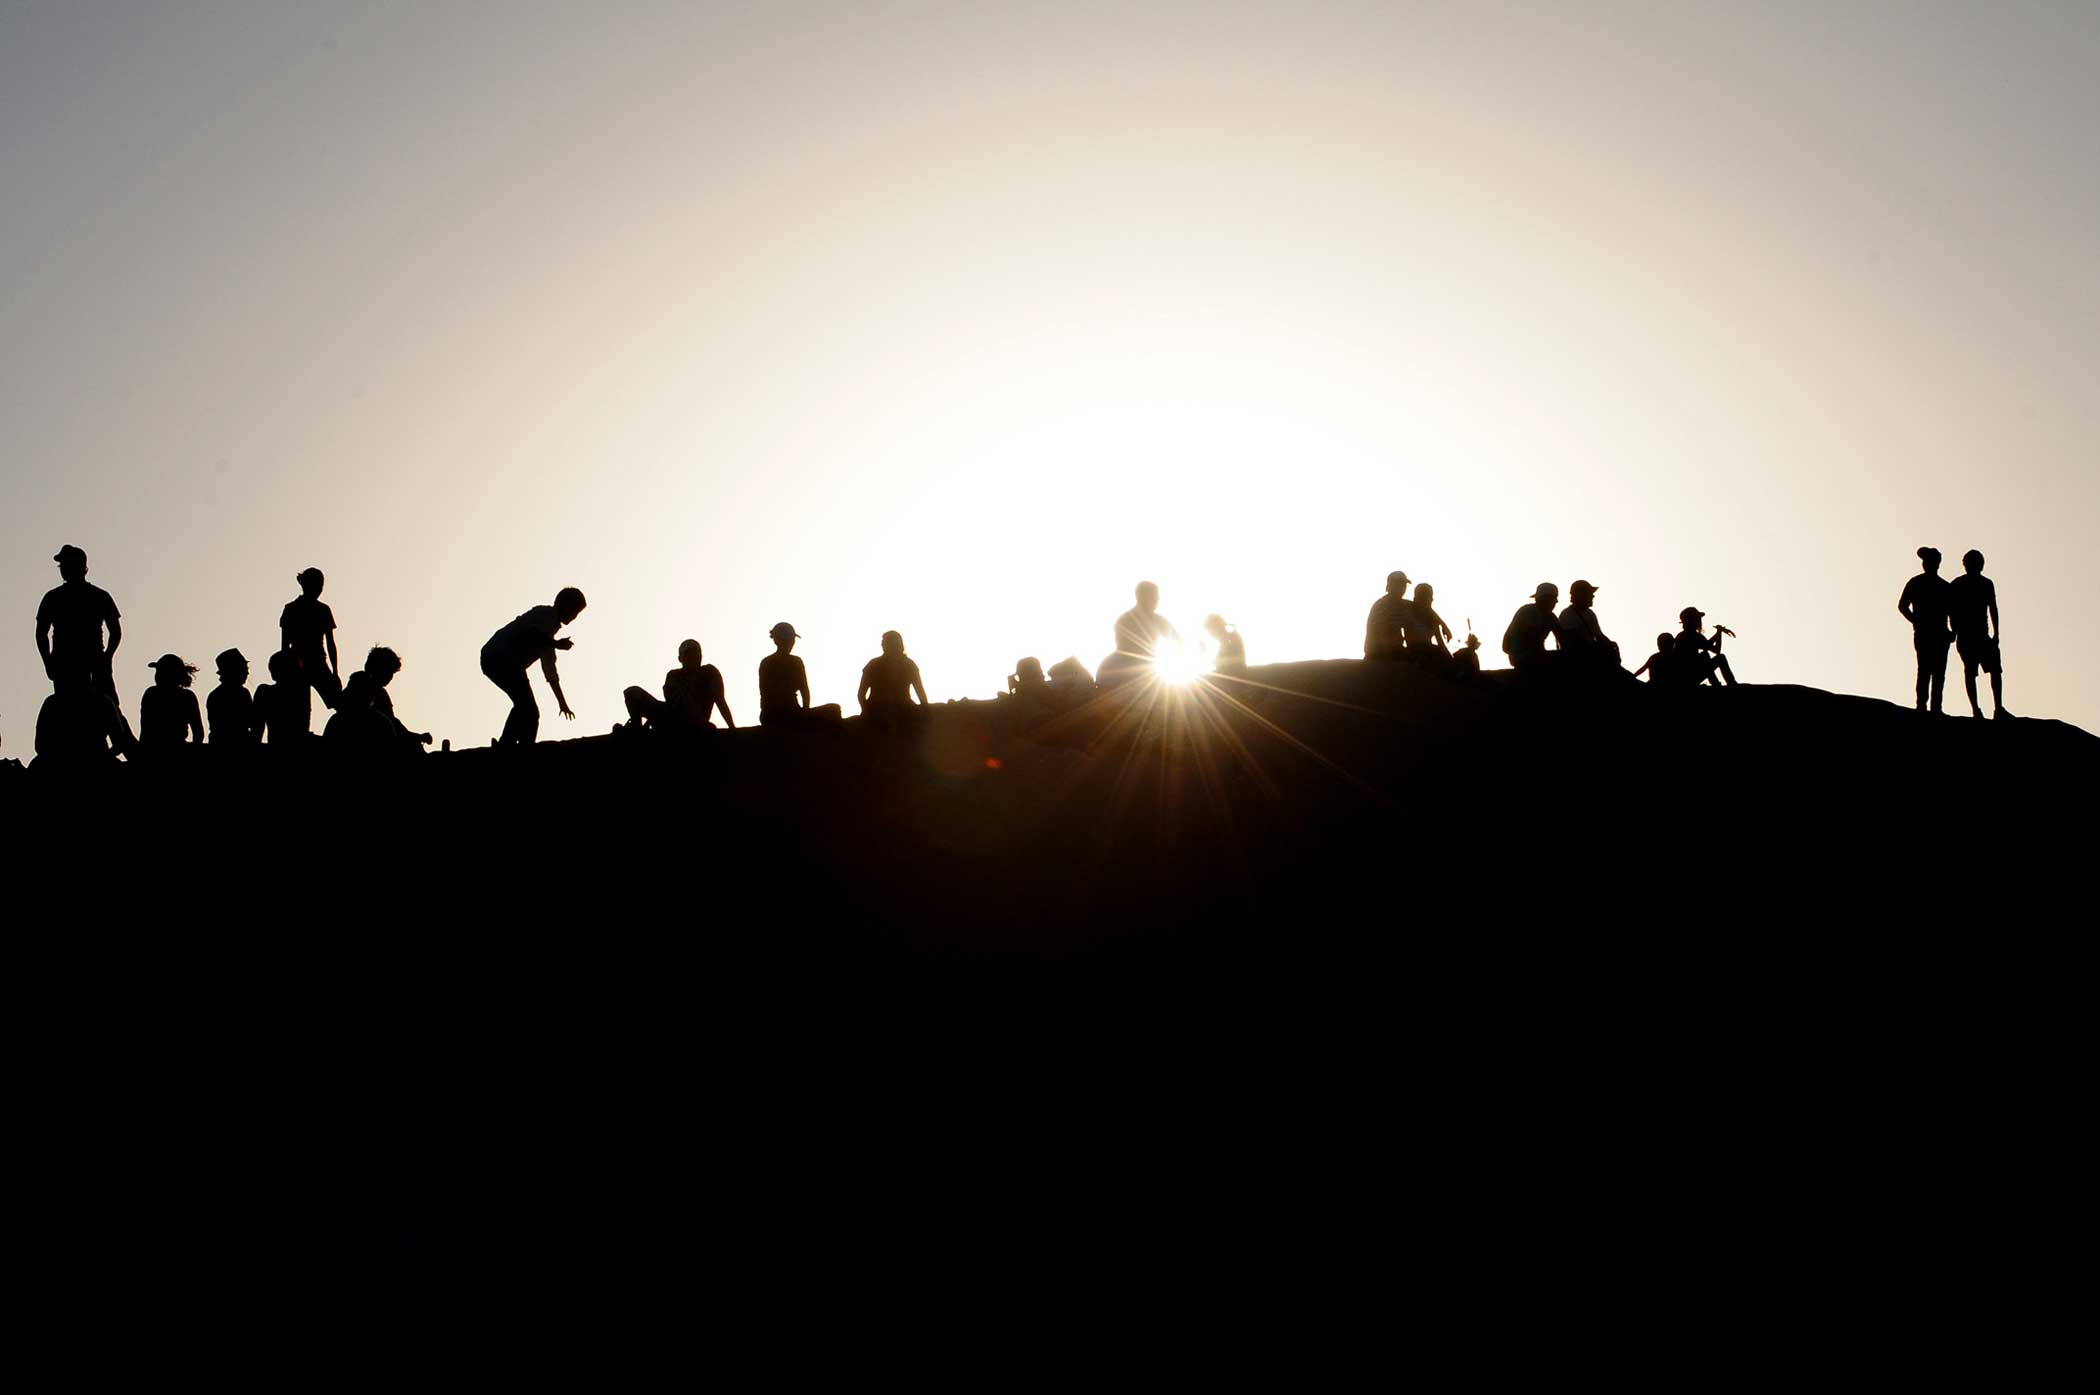 Residents gathered in the Samalayuca Dune Fields
                               in Chihuaua during an attempt to break the Guiness World Record for the most people using telescopes at a time.